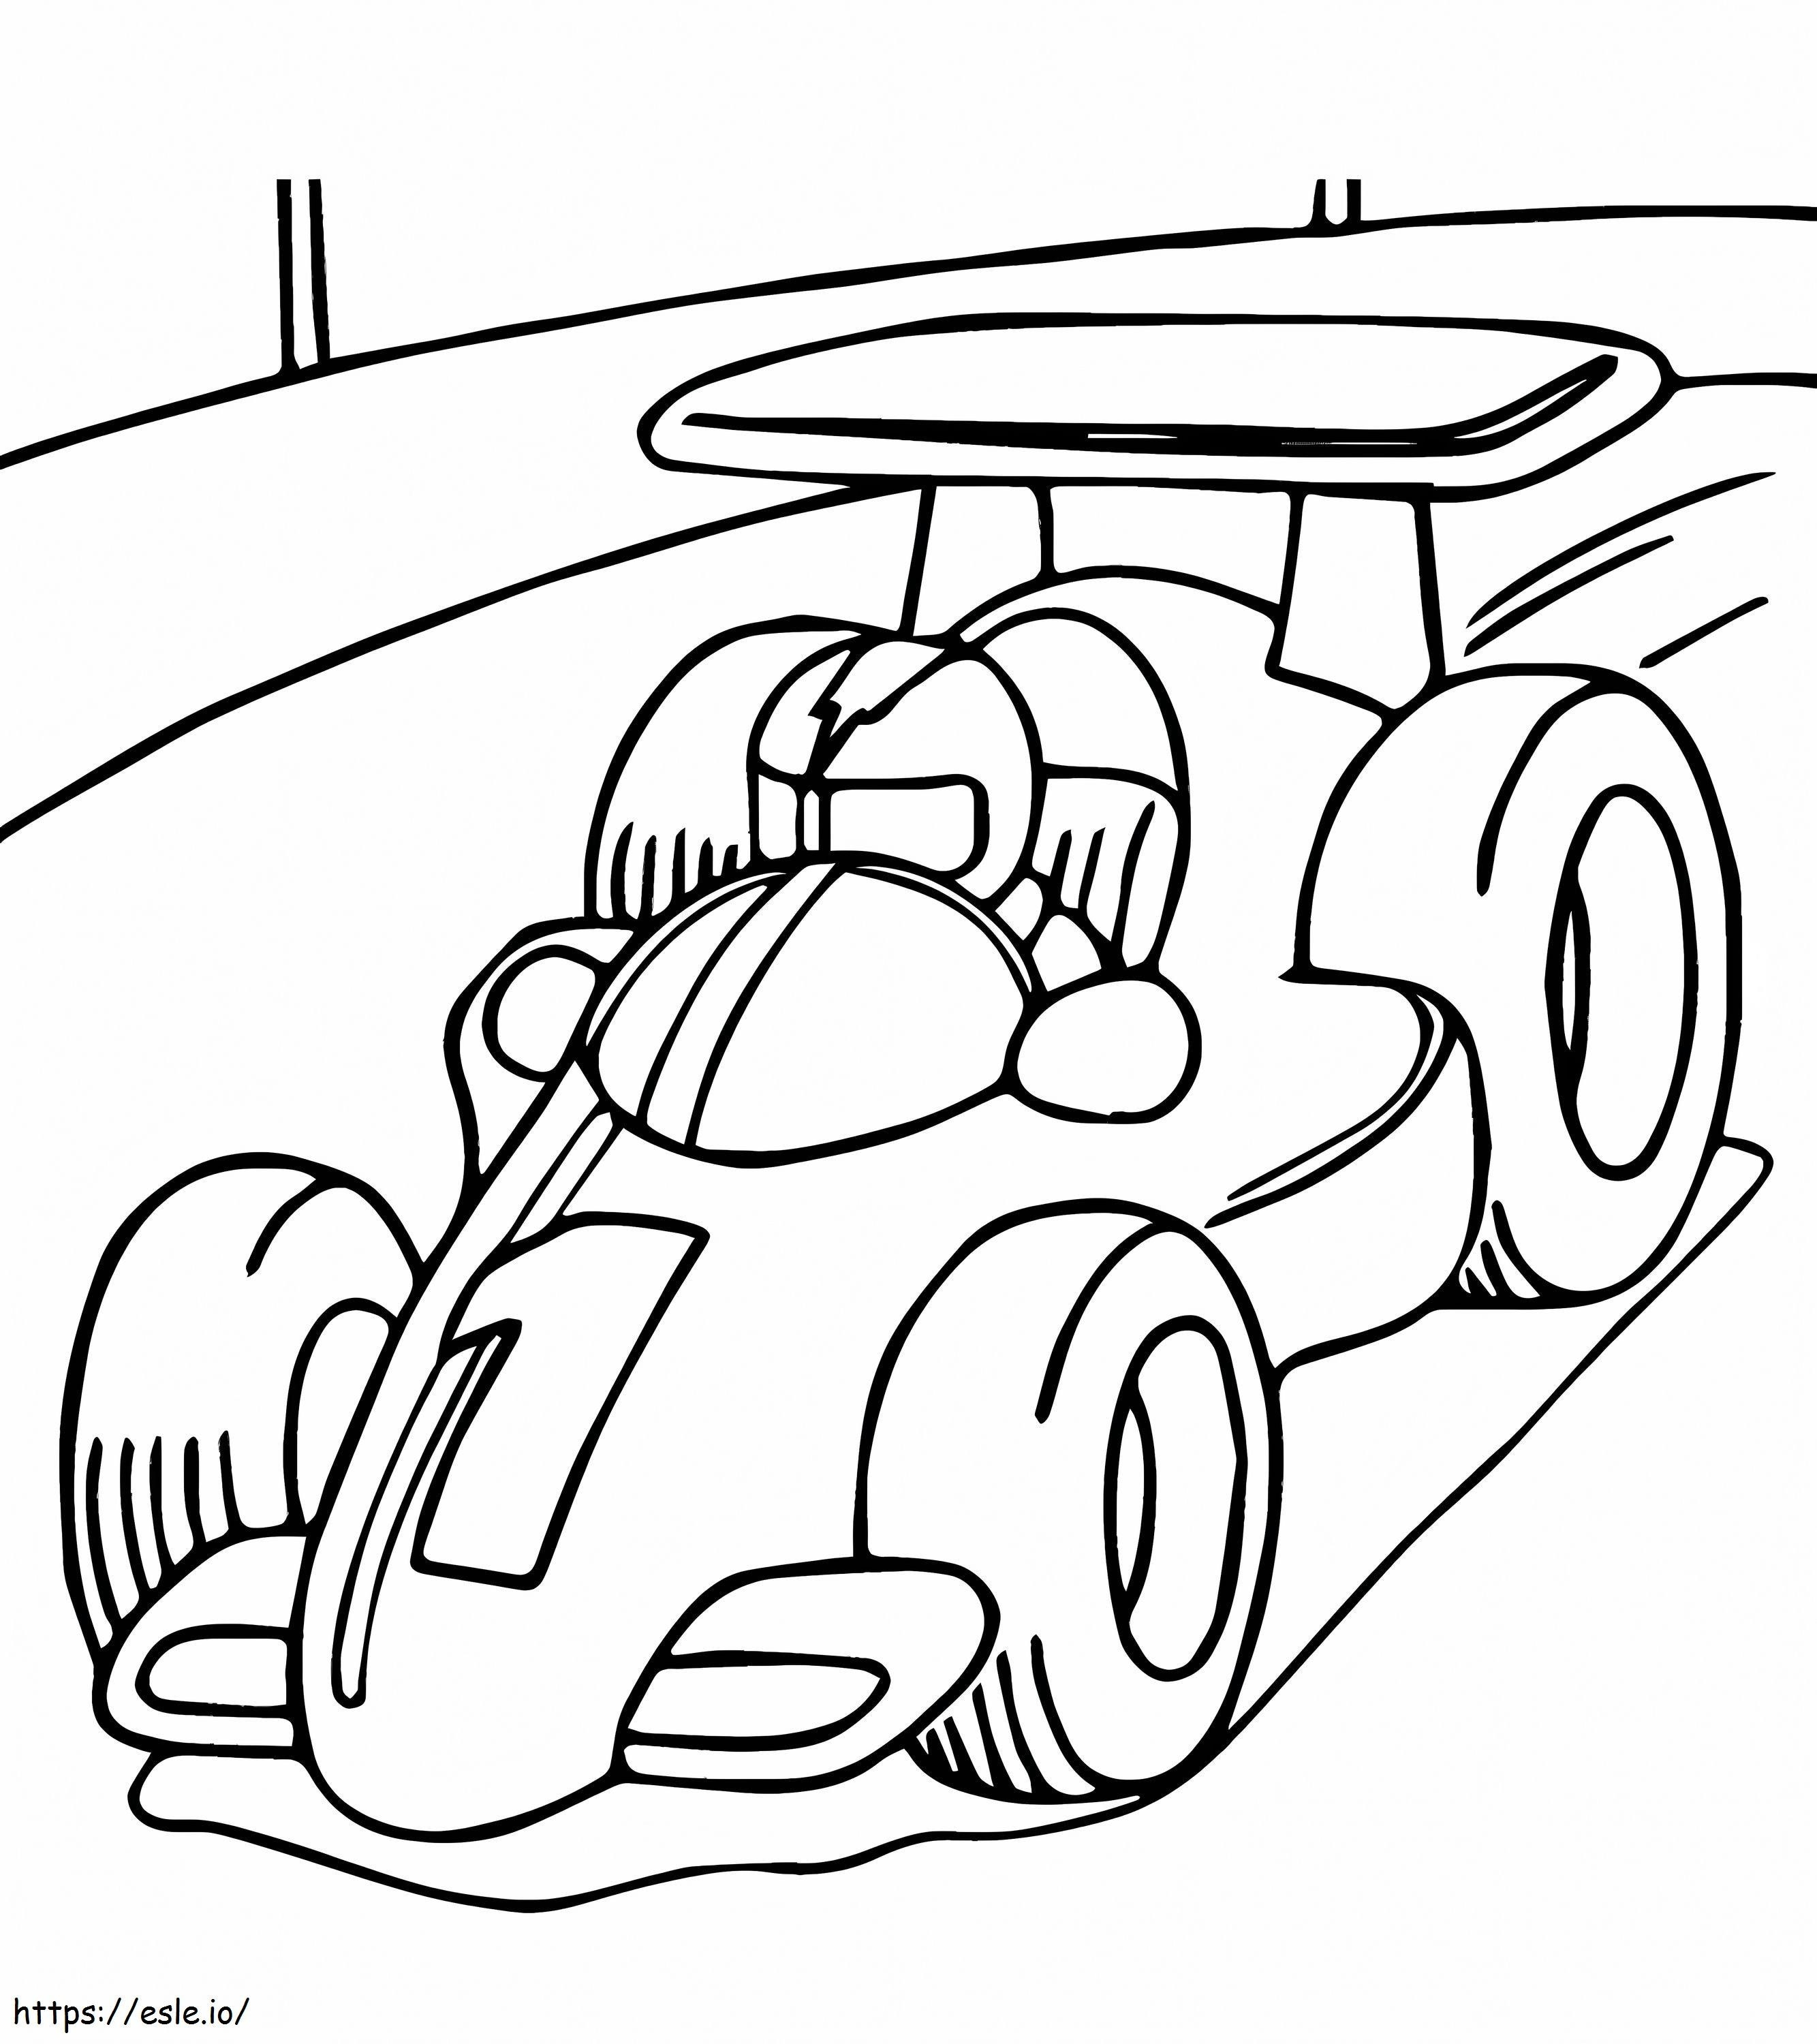 1575248170 Top 25 Race Car For Your Little Ones 1 coloring page